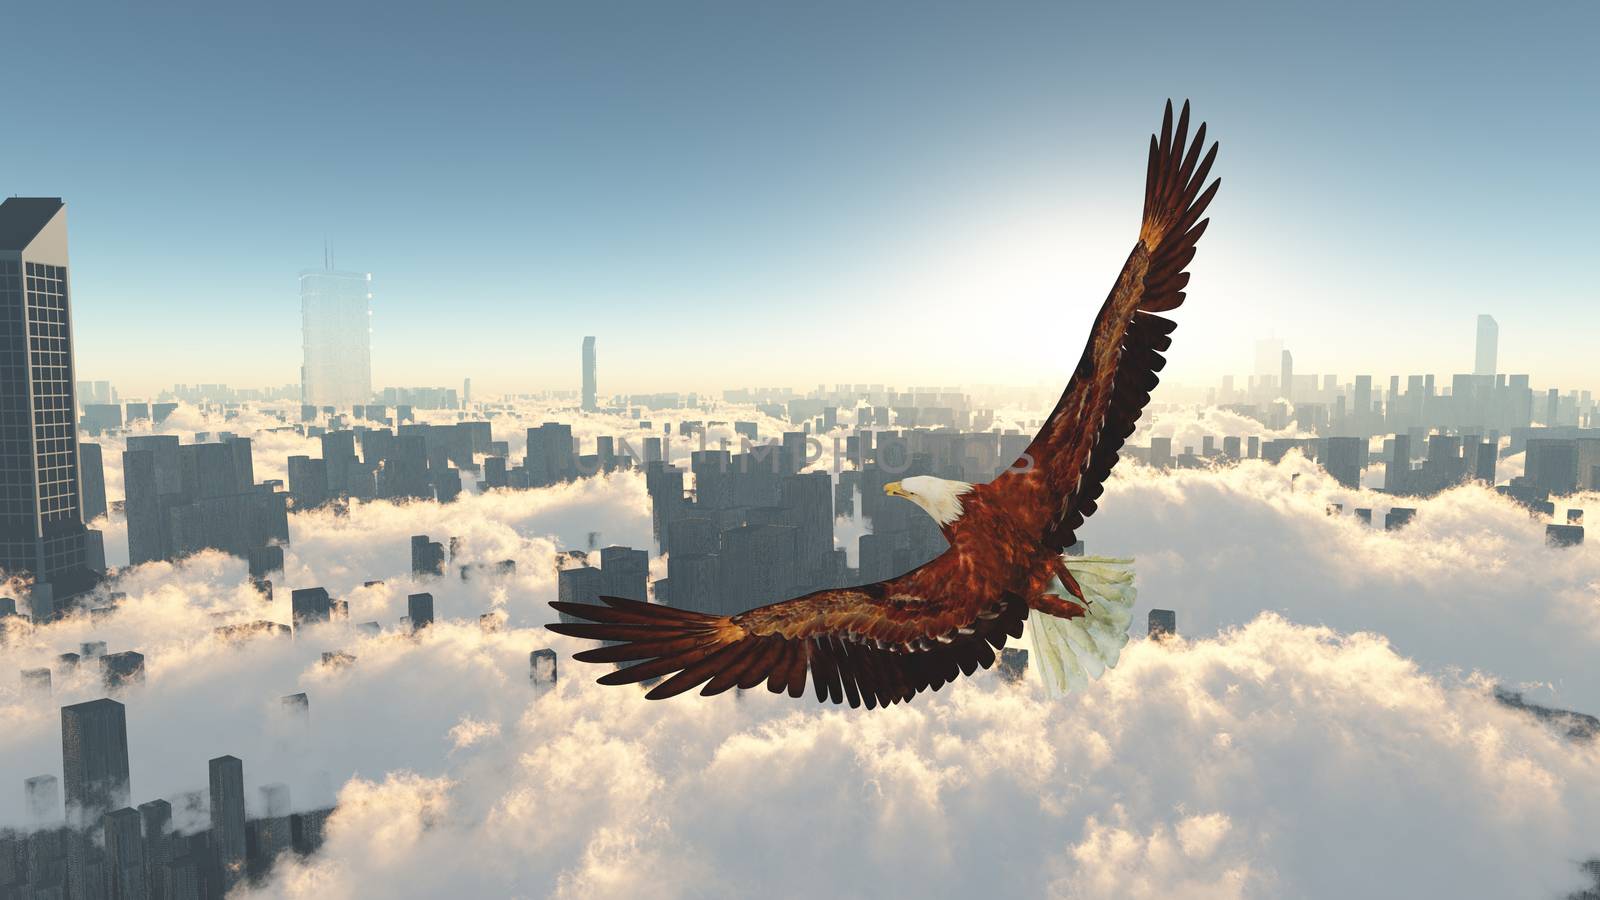 Eagle flies above megapolis by applesstock